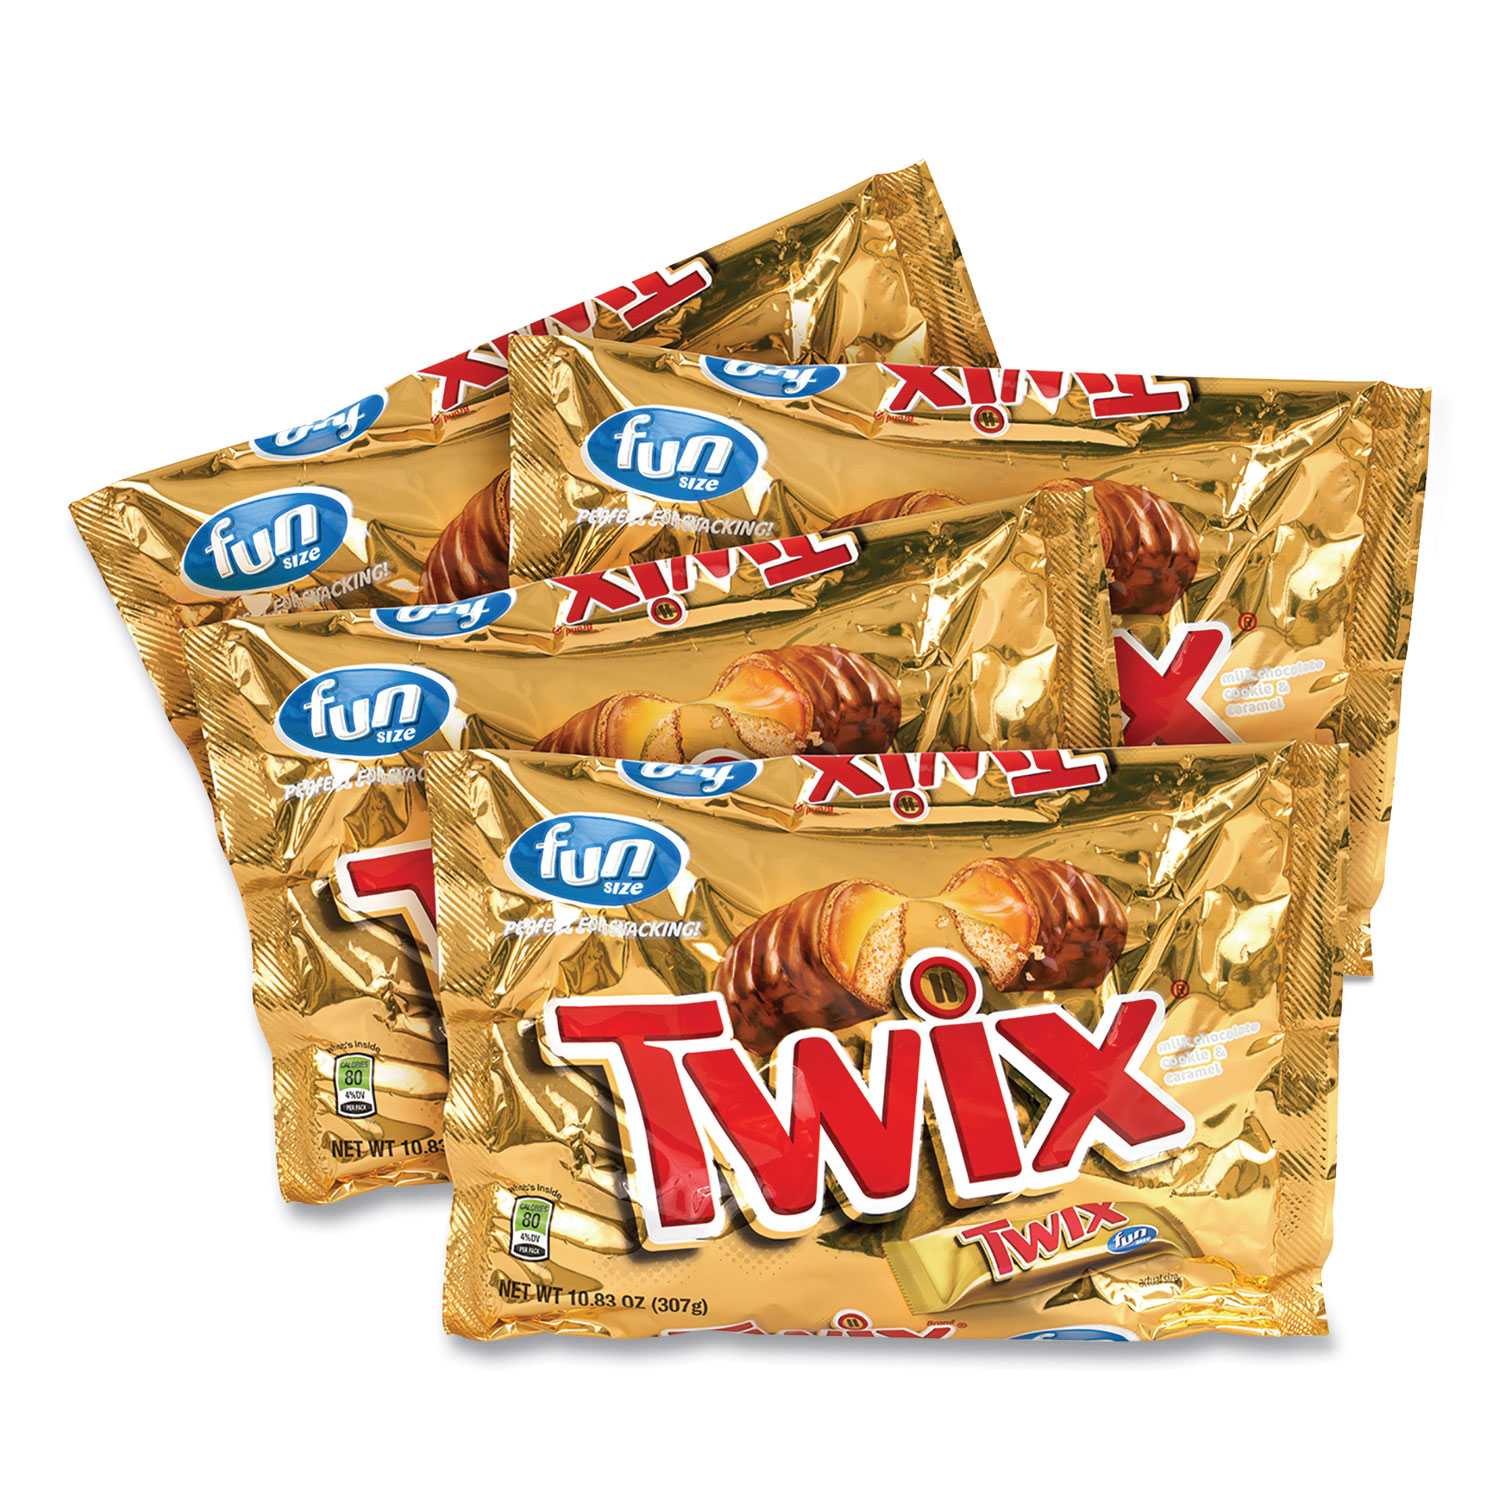  Twix 551178 Cookie Bars, Fun Size, 10.83 oz Bag, 4 Bags/Box, Free Delivery in 1-4 Business Days (GRR20900467) 